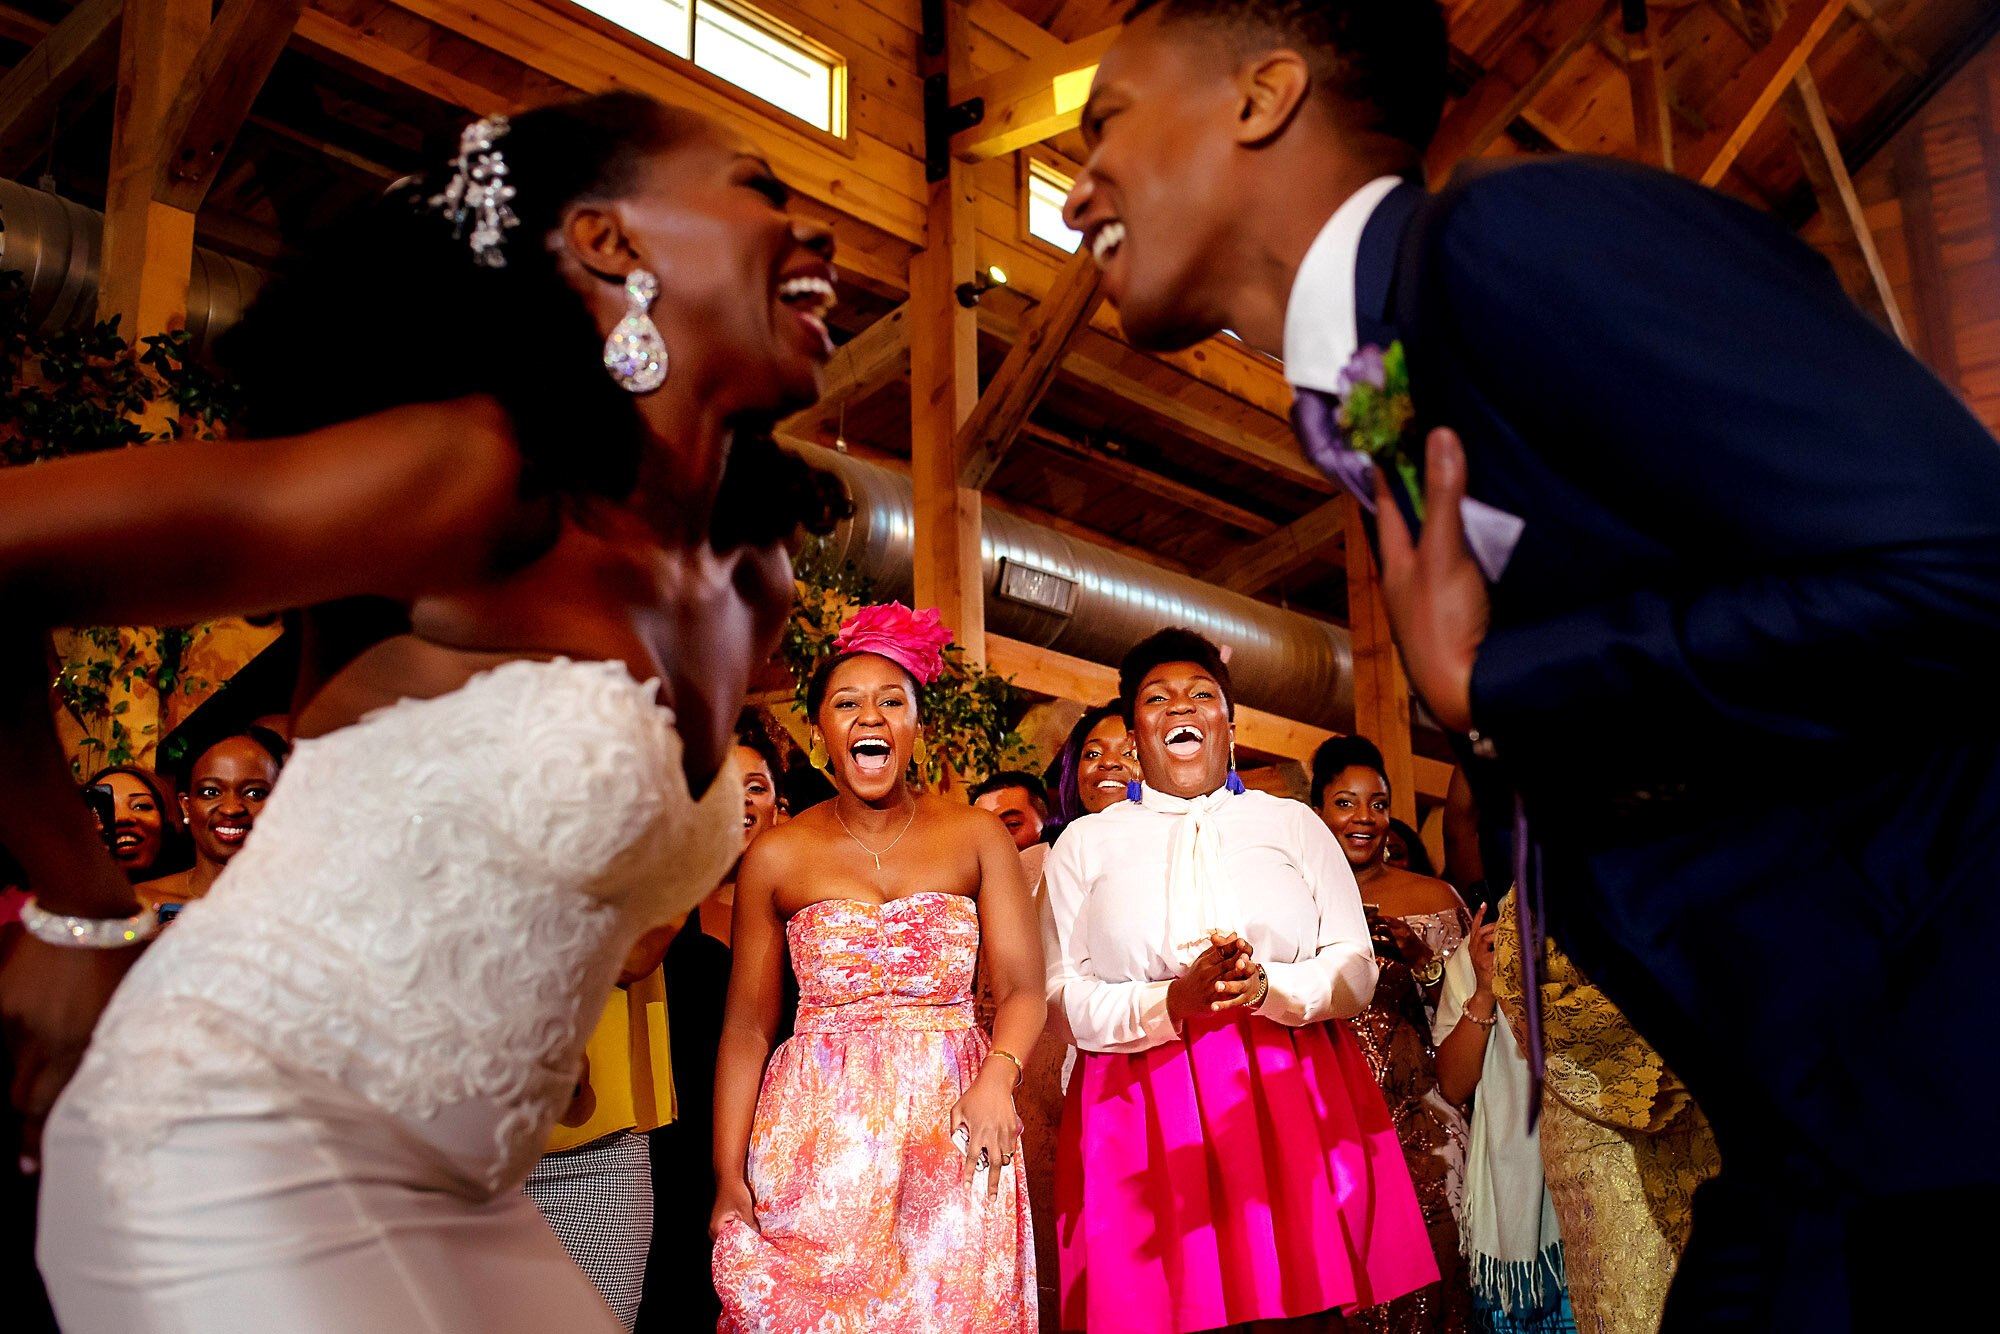 42-Austin-wedding-photographer-Jide-Alakija-couple dancing while theres a reaction from guests.jpg.JPG